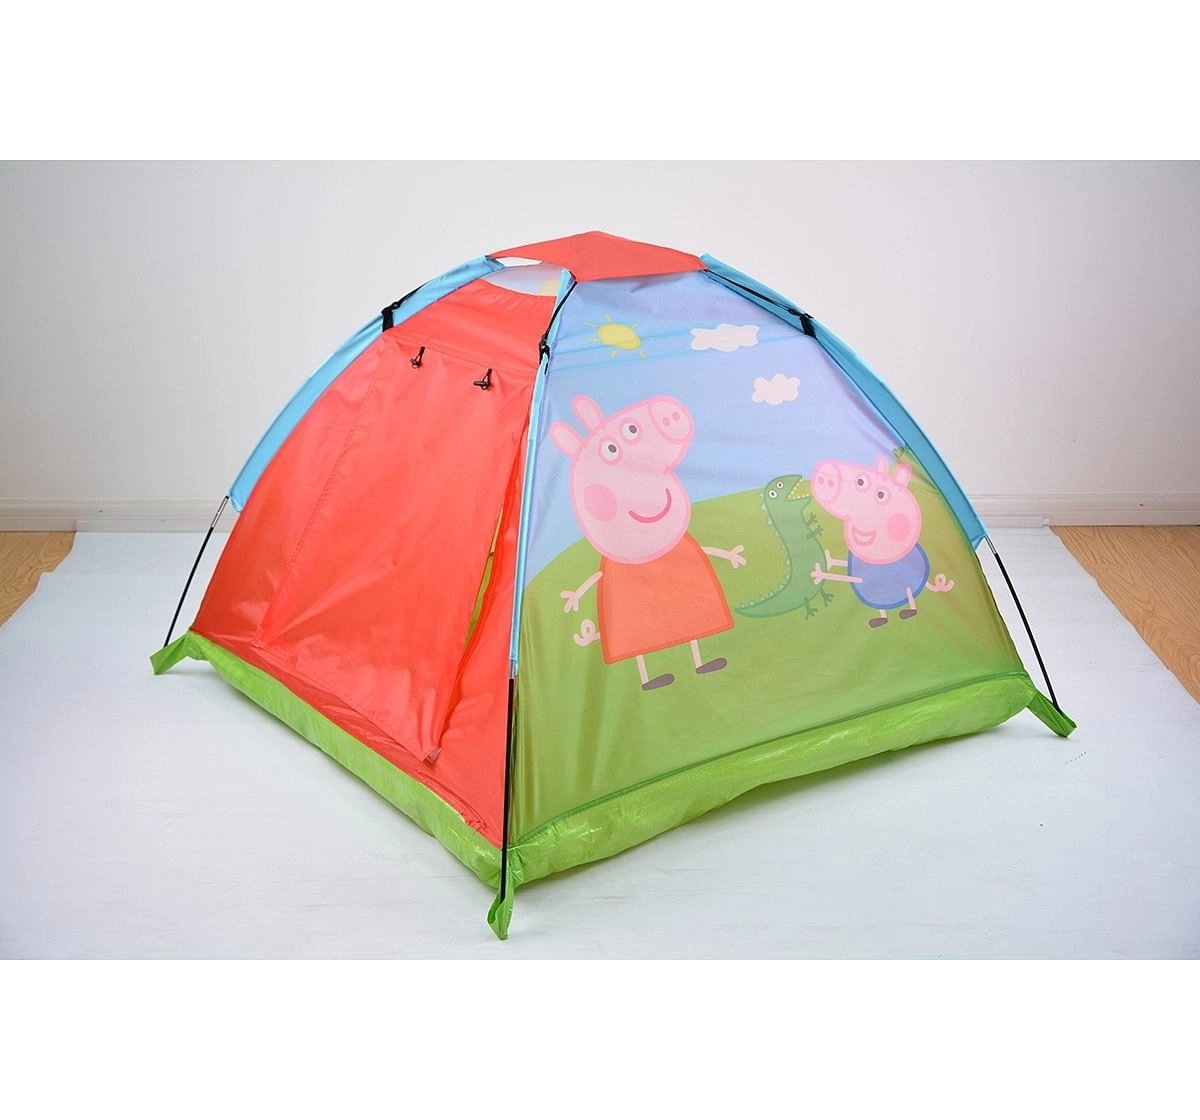 Flourish Peppa Pig Camping Tent Outdoor Leisure for Kids age 3Y+ 